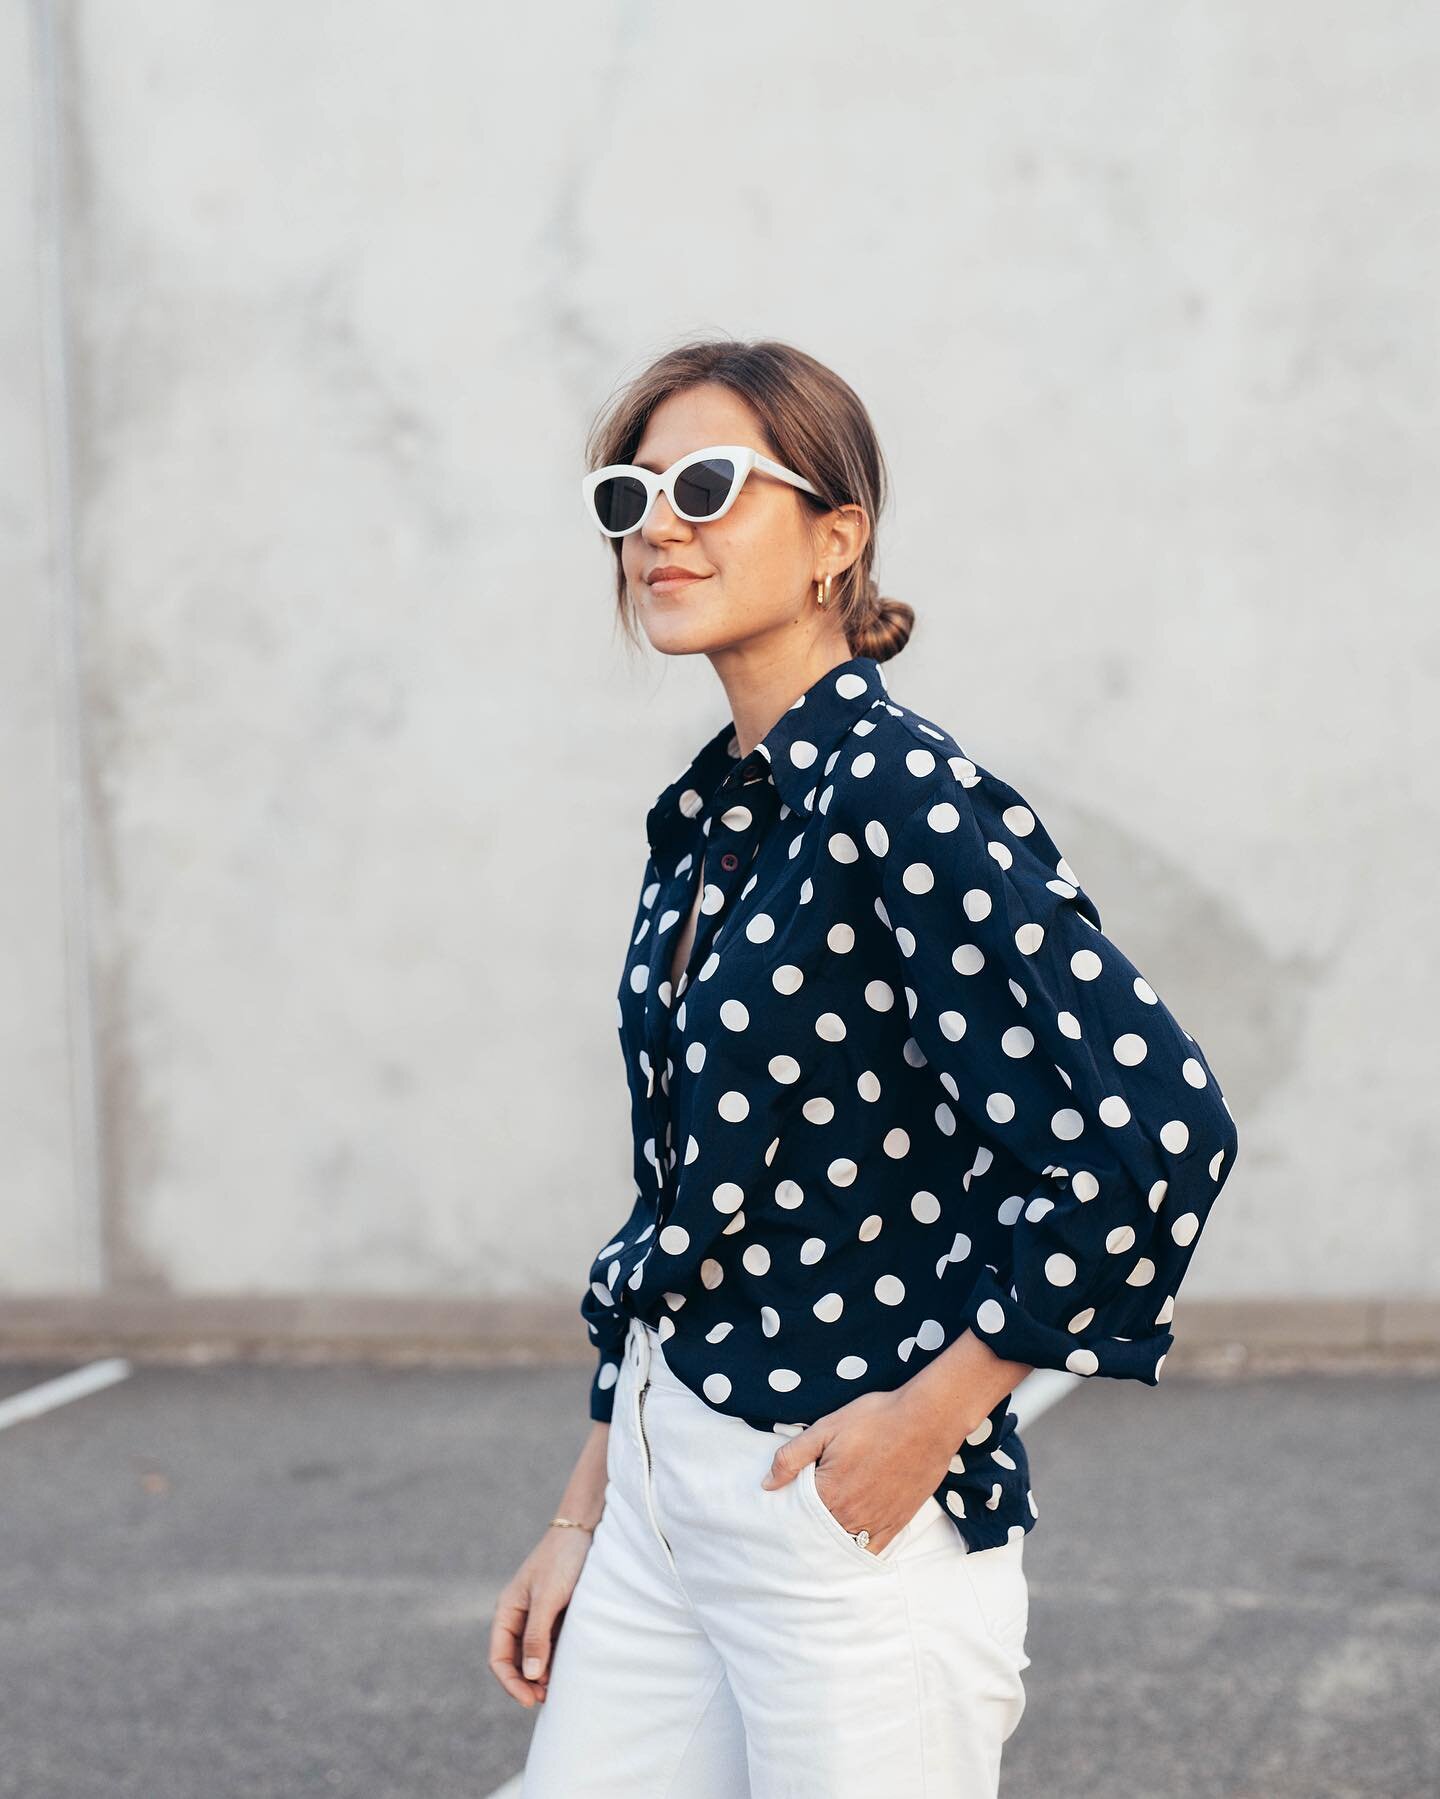 When you find the perfect vintage polka dot shirt thanks to @thepickerconcept - it quite possibly is my favourite piece at the moment, bold yet so versatile 💙